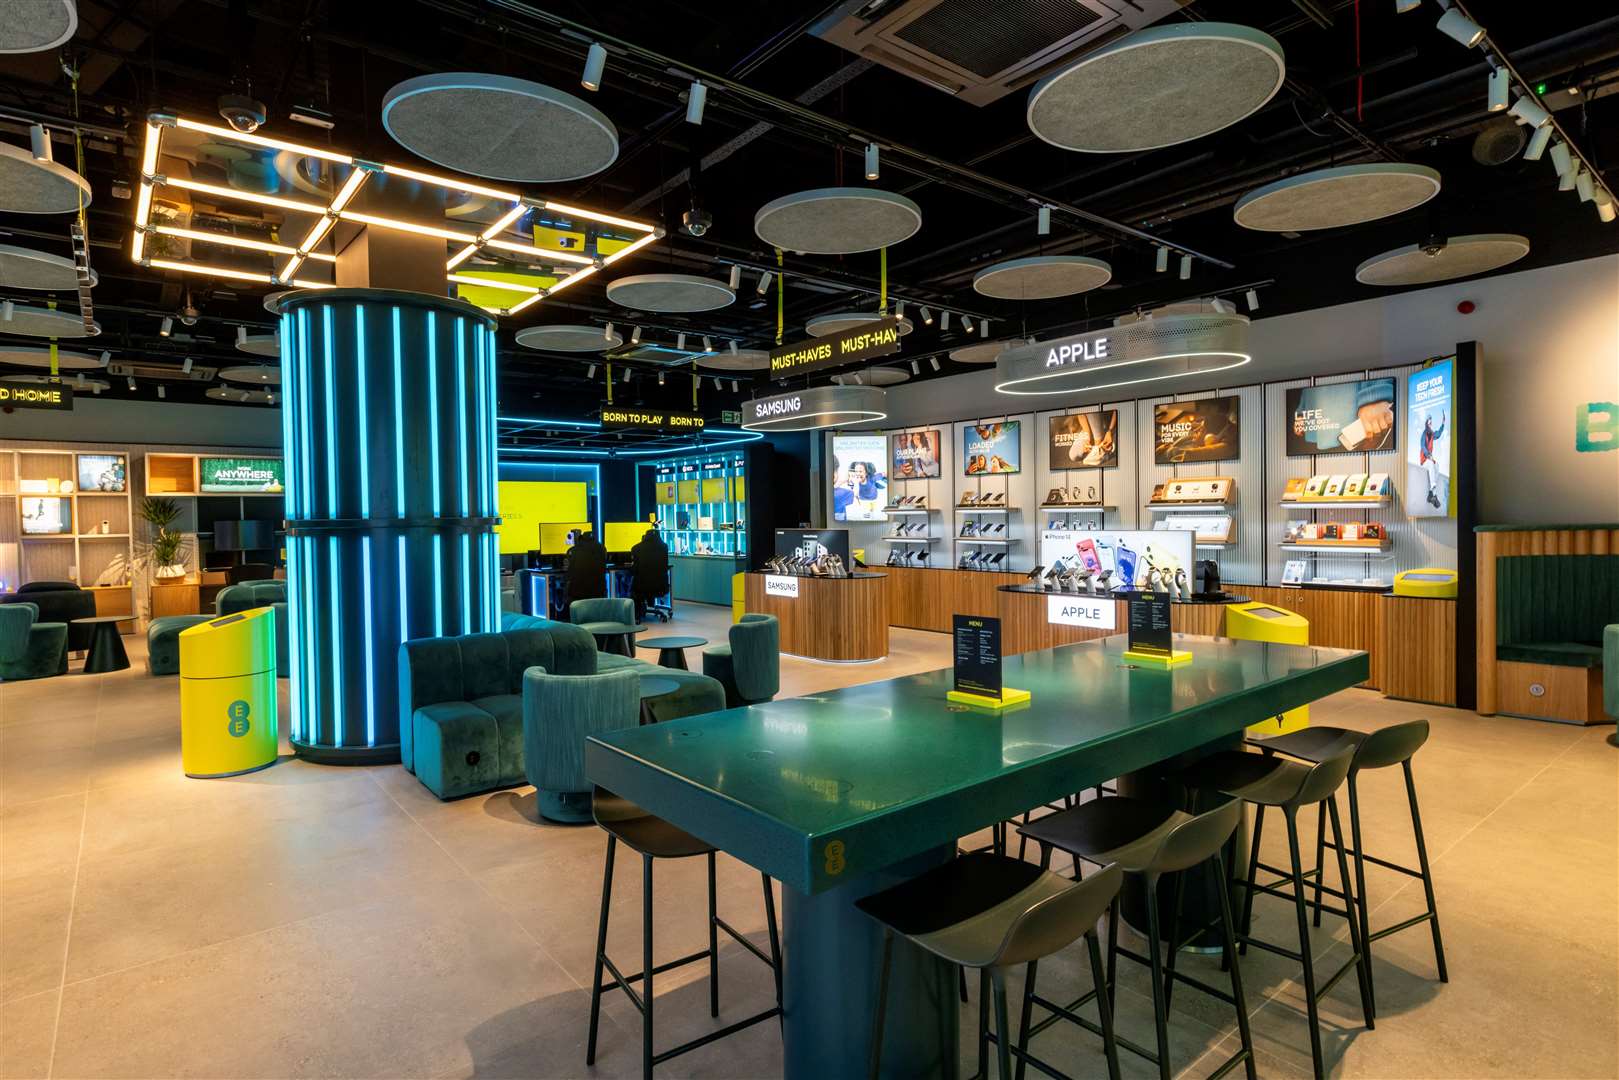 Inside the new EE Experience store at Bluewater. Picture: EE